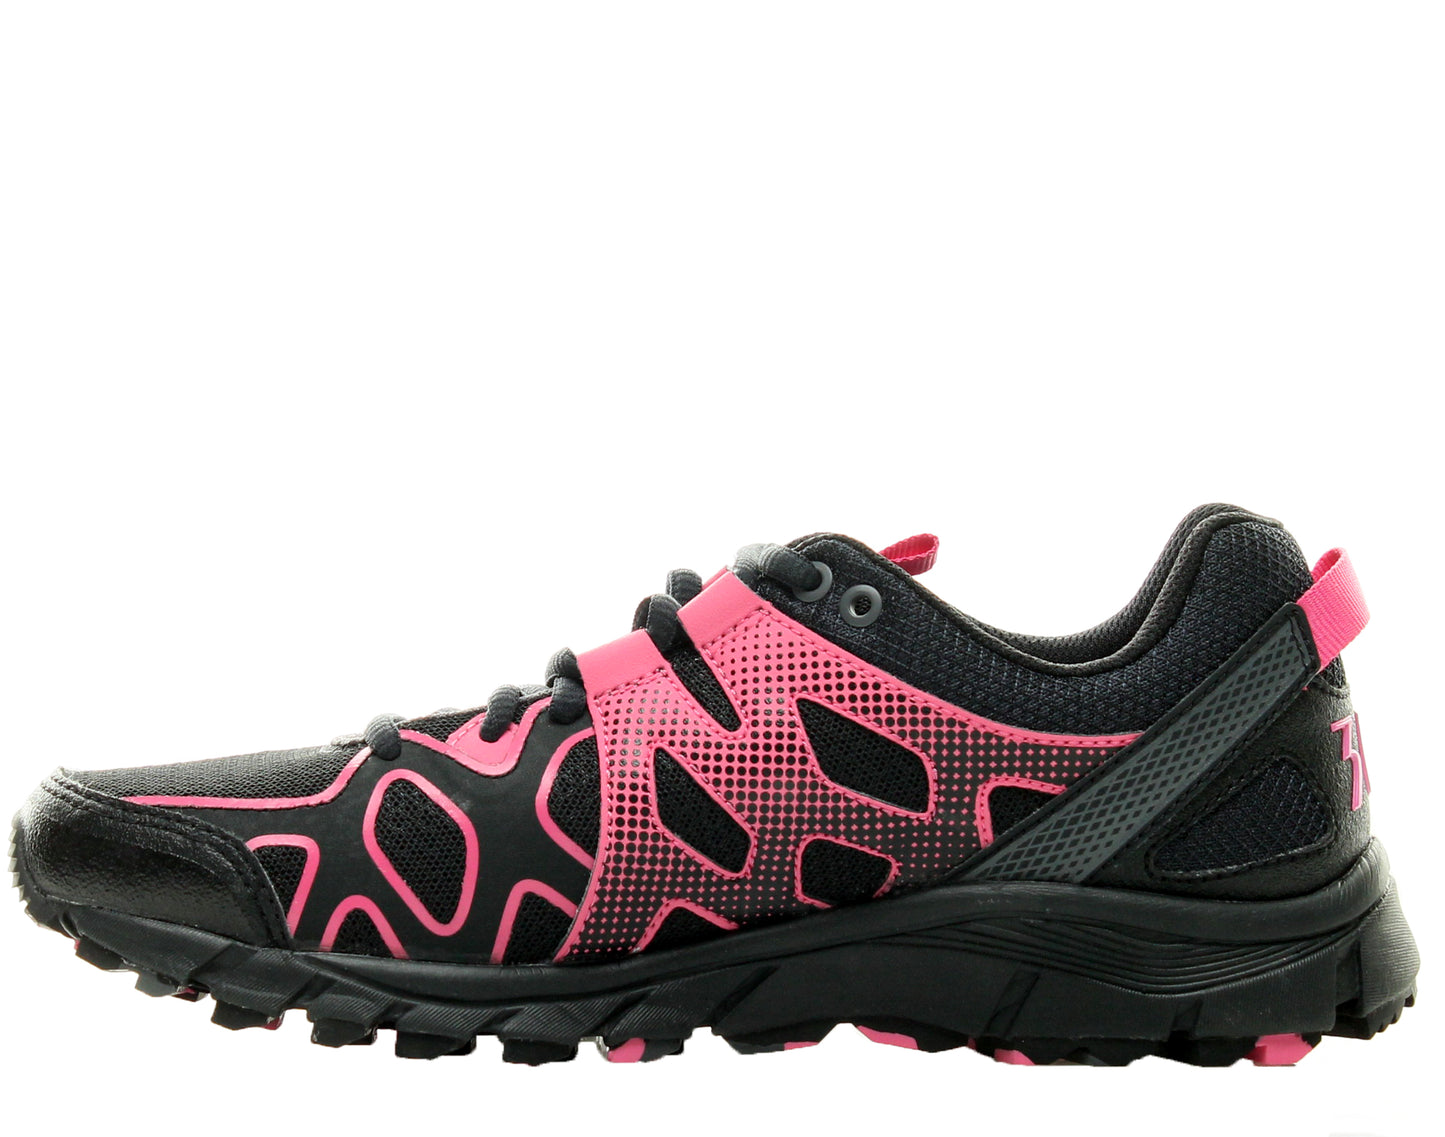 361° Ascent Women's Trail Running Shoes